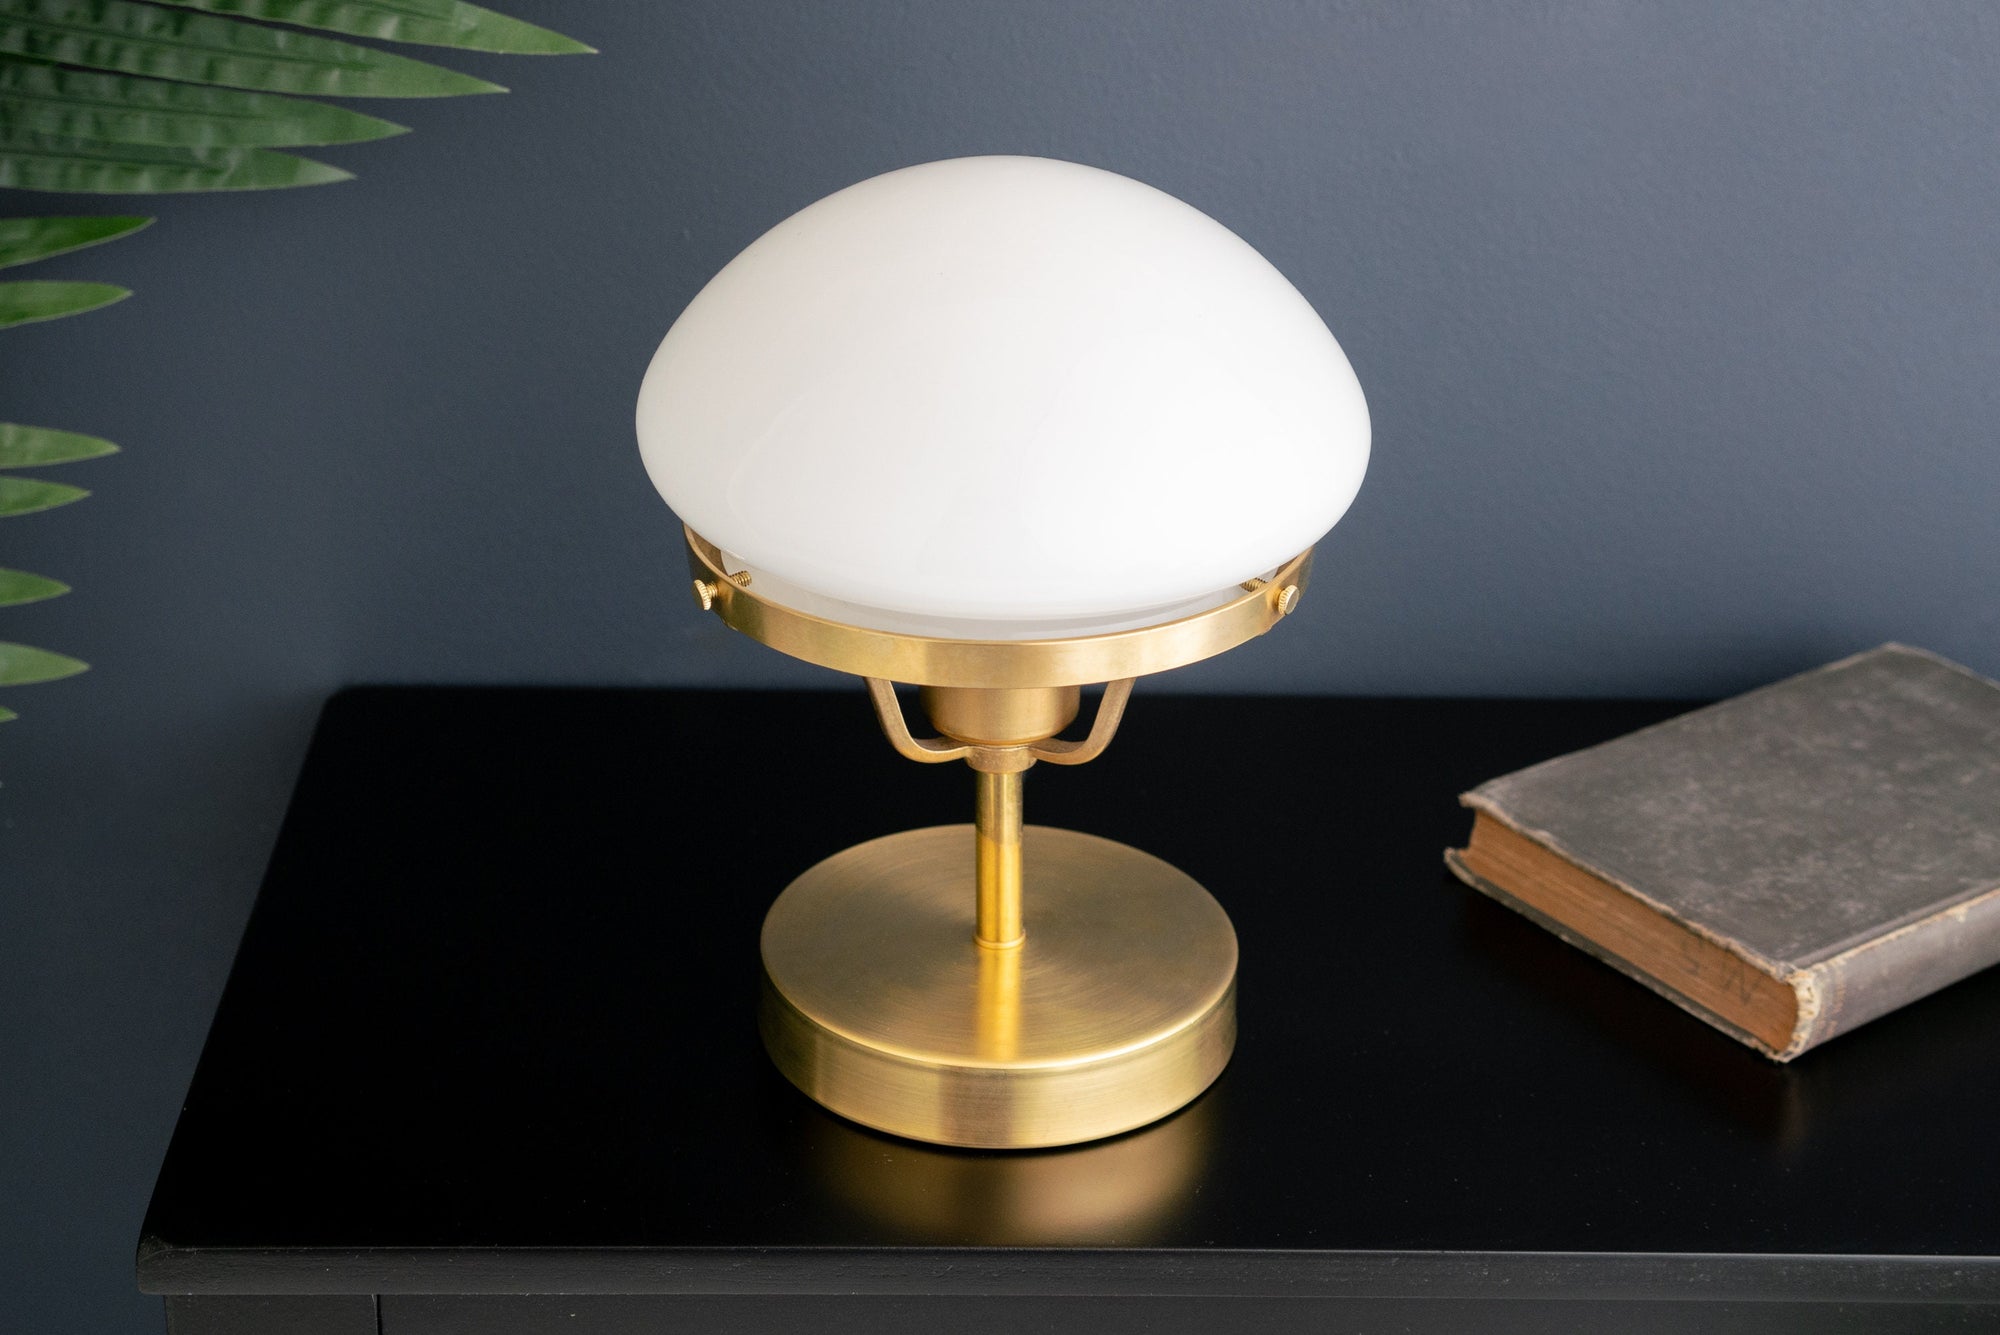 TABLE LAMP MODEL No. 7579 - Peared Creation